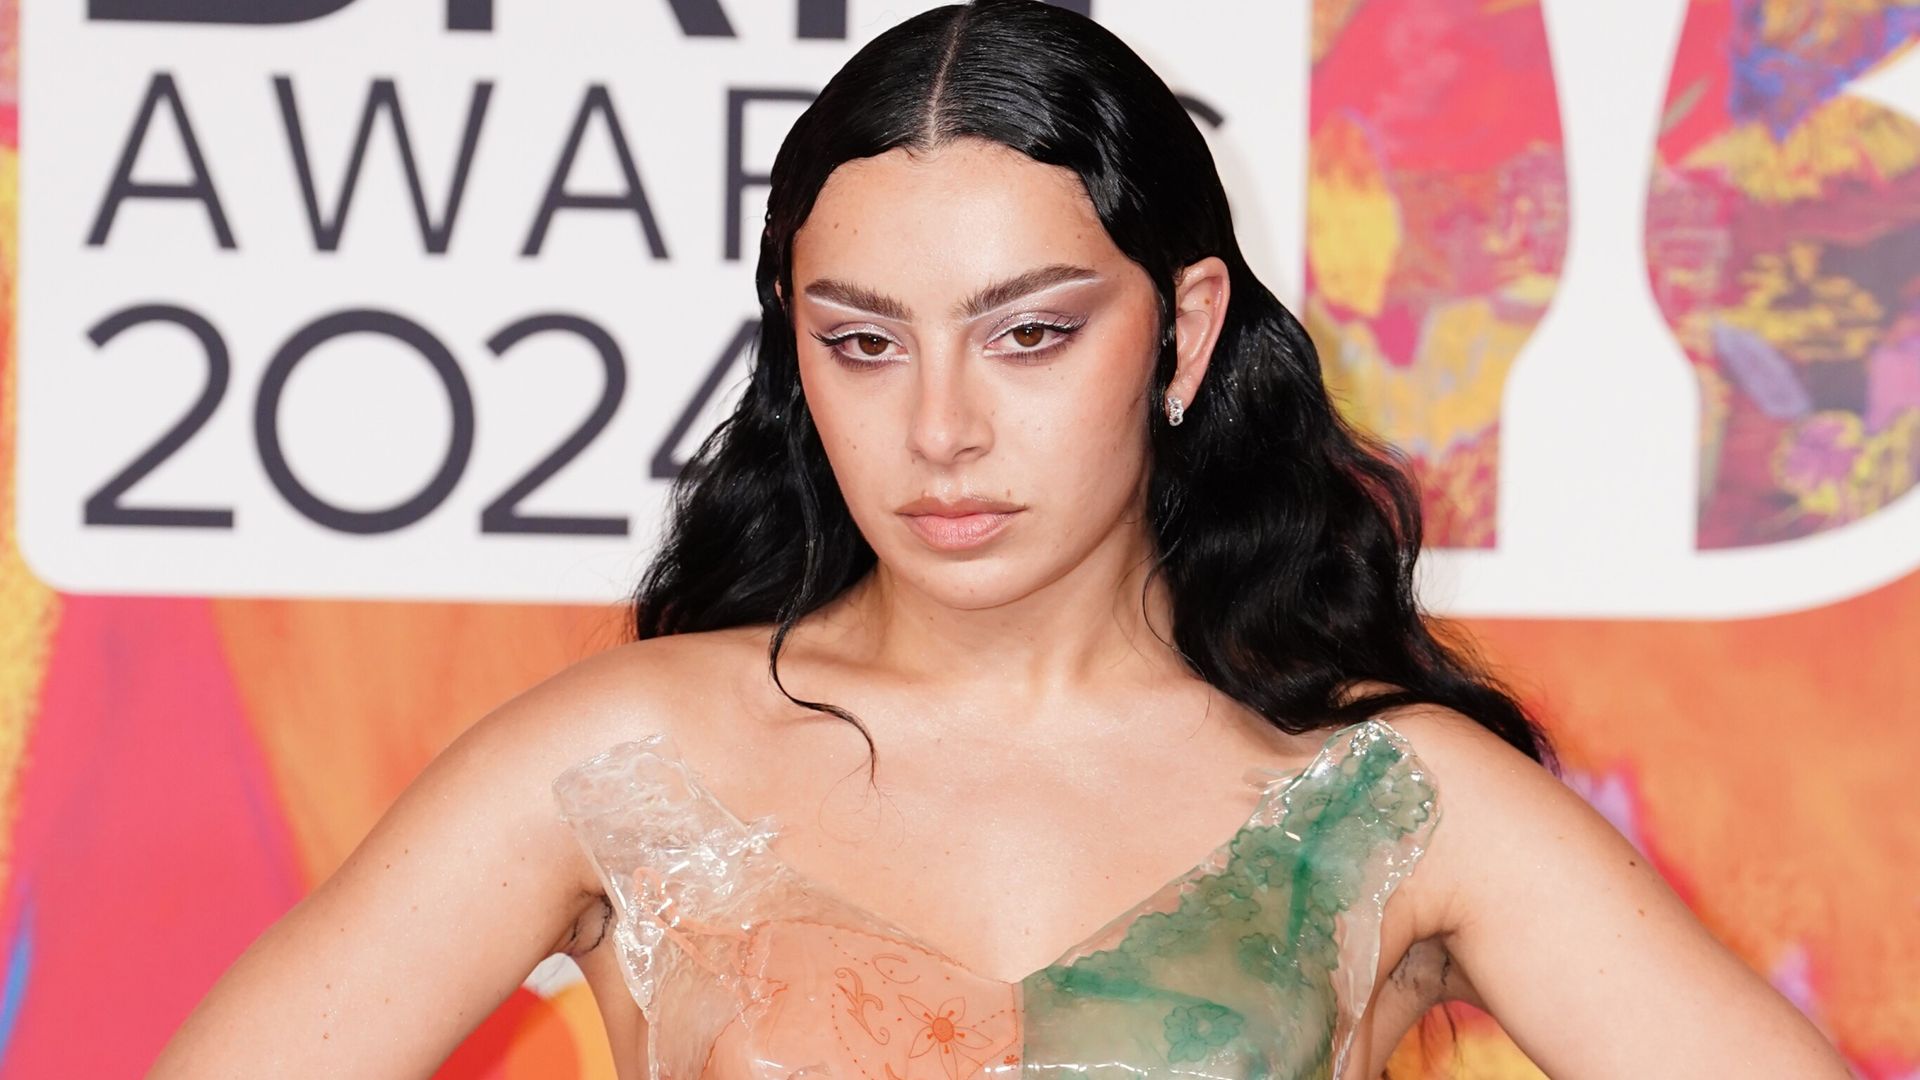 Charli XCX tells fans 'I won't tolerate it' over Taylor Swift chant